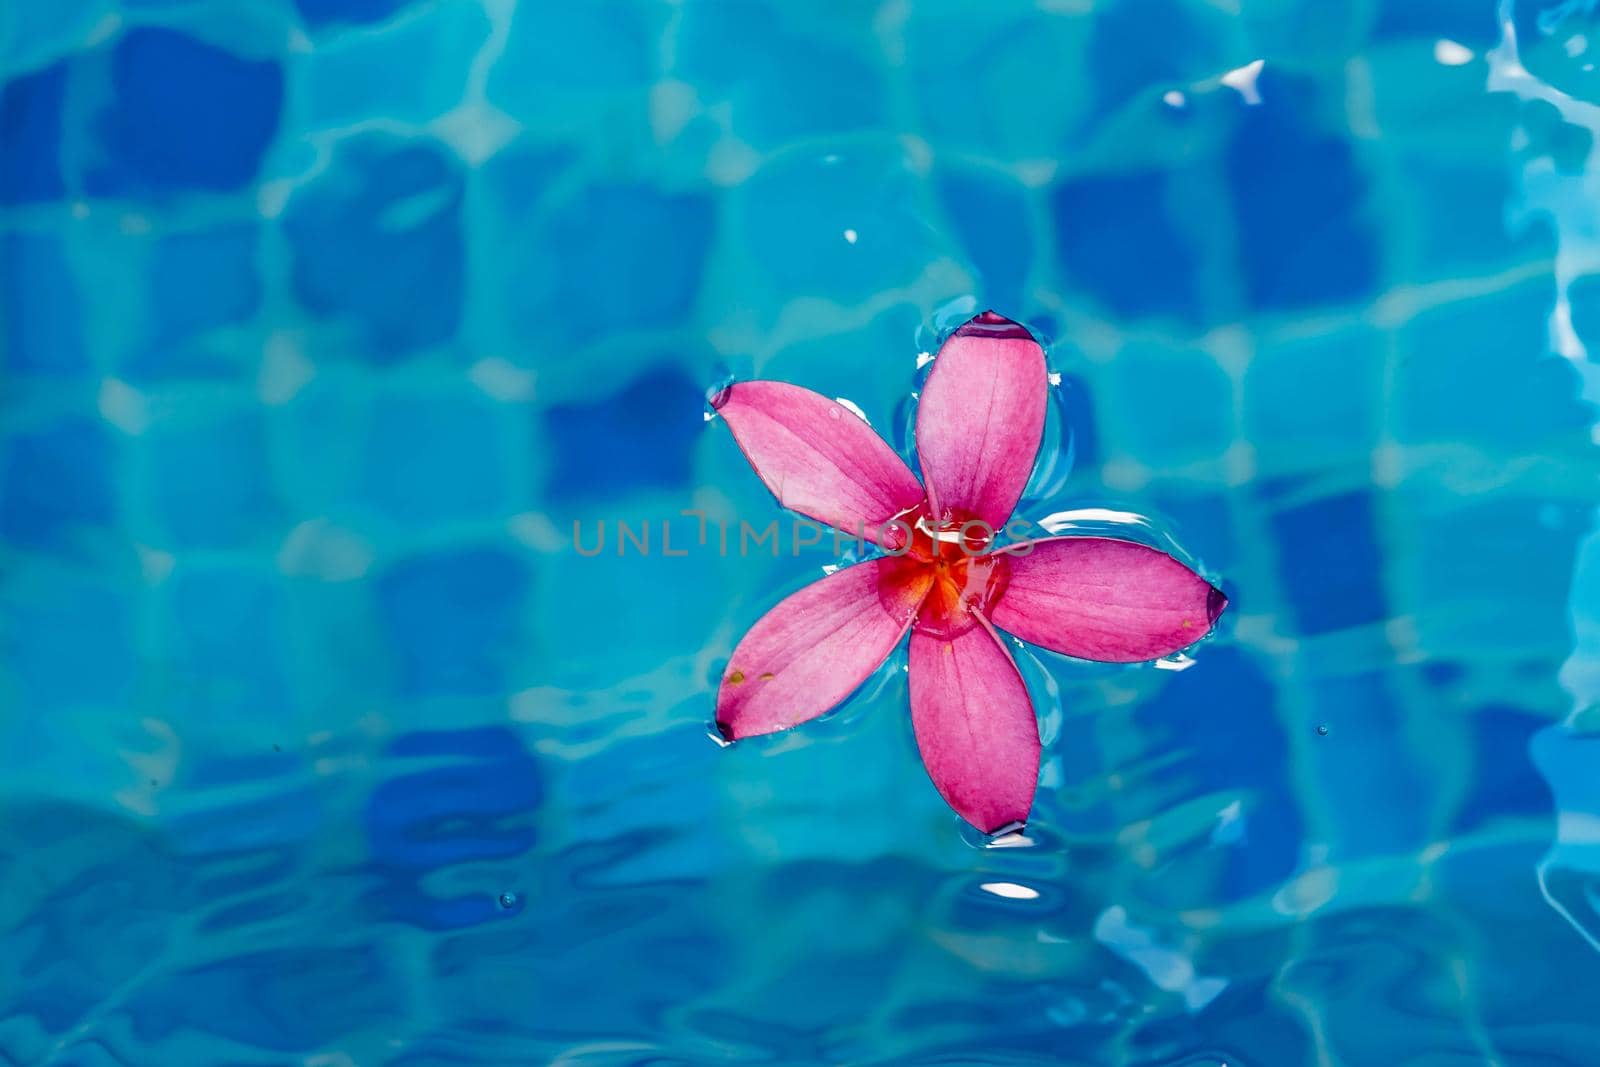 Pink flower closeup shot while floating on blue pool water by billroque